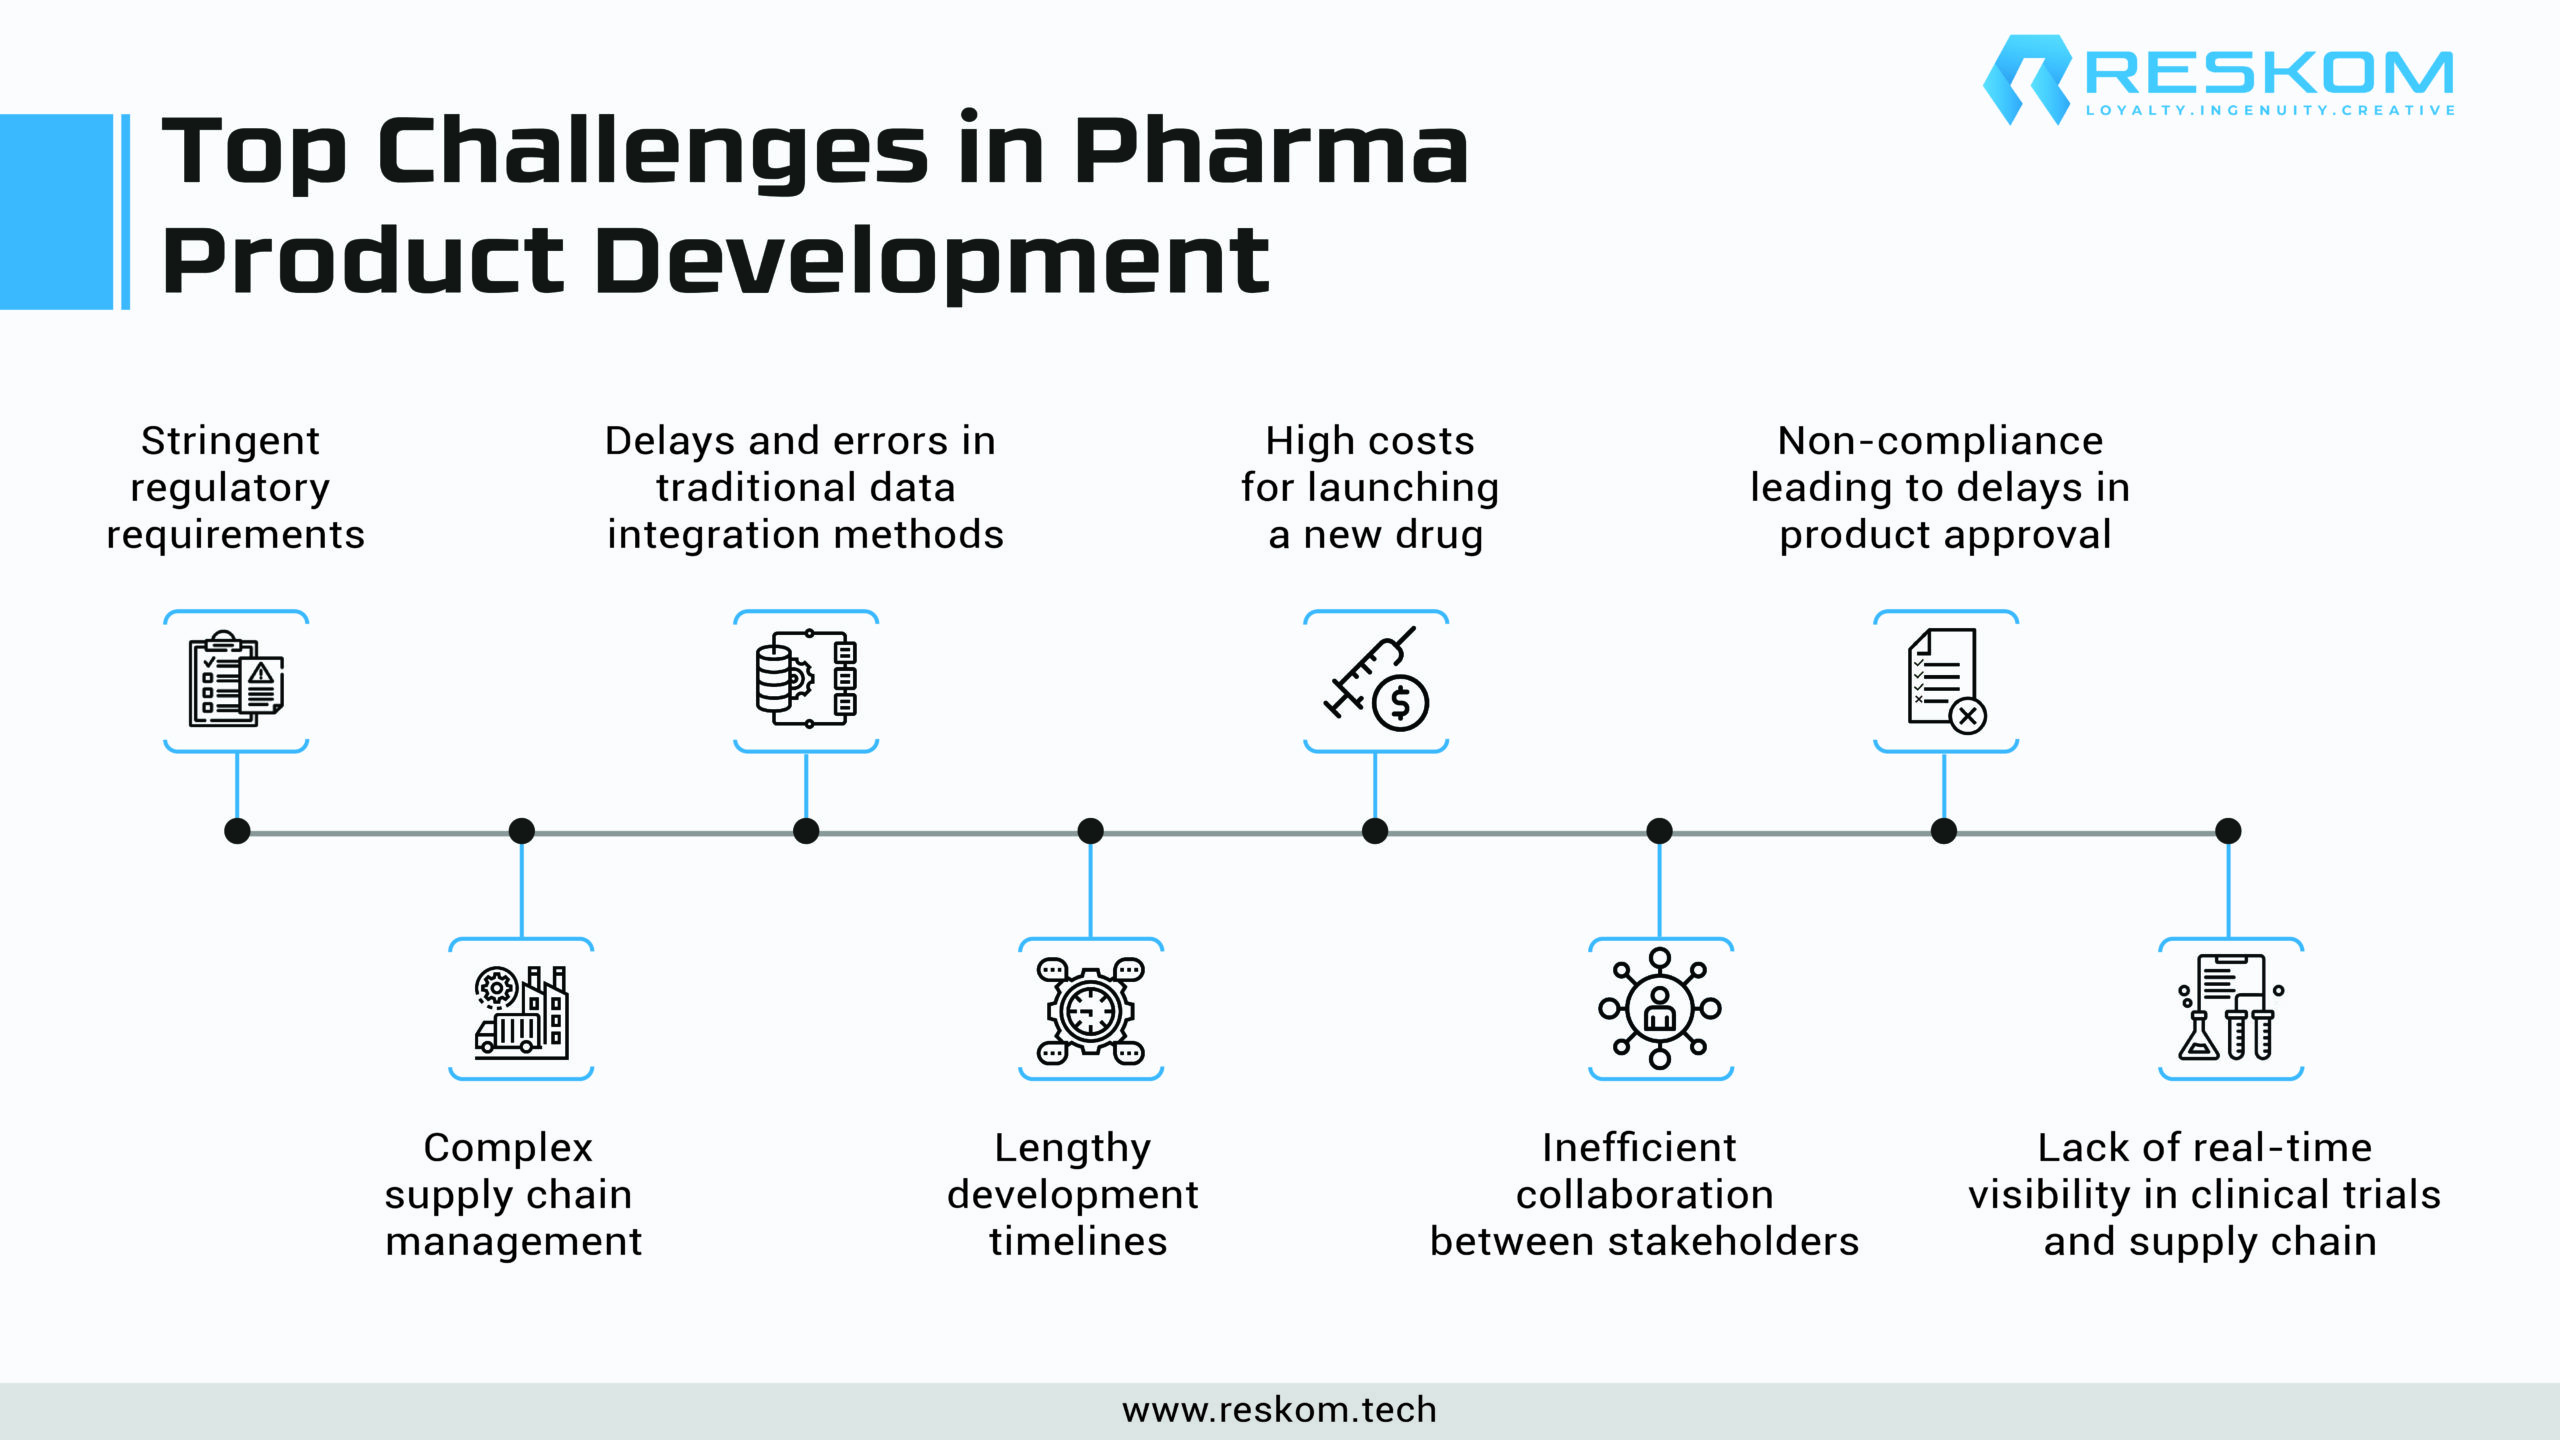 Top Challenges in Pharma 2